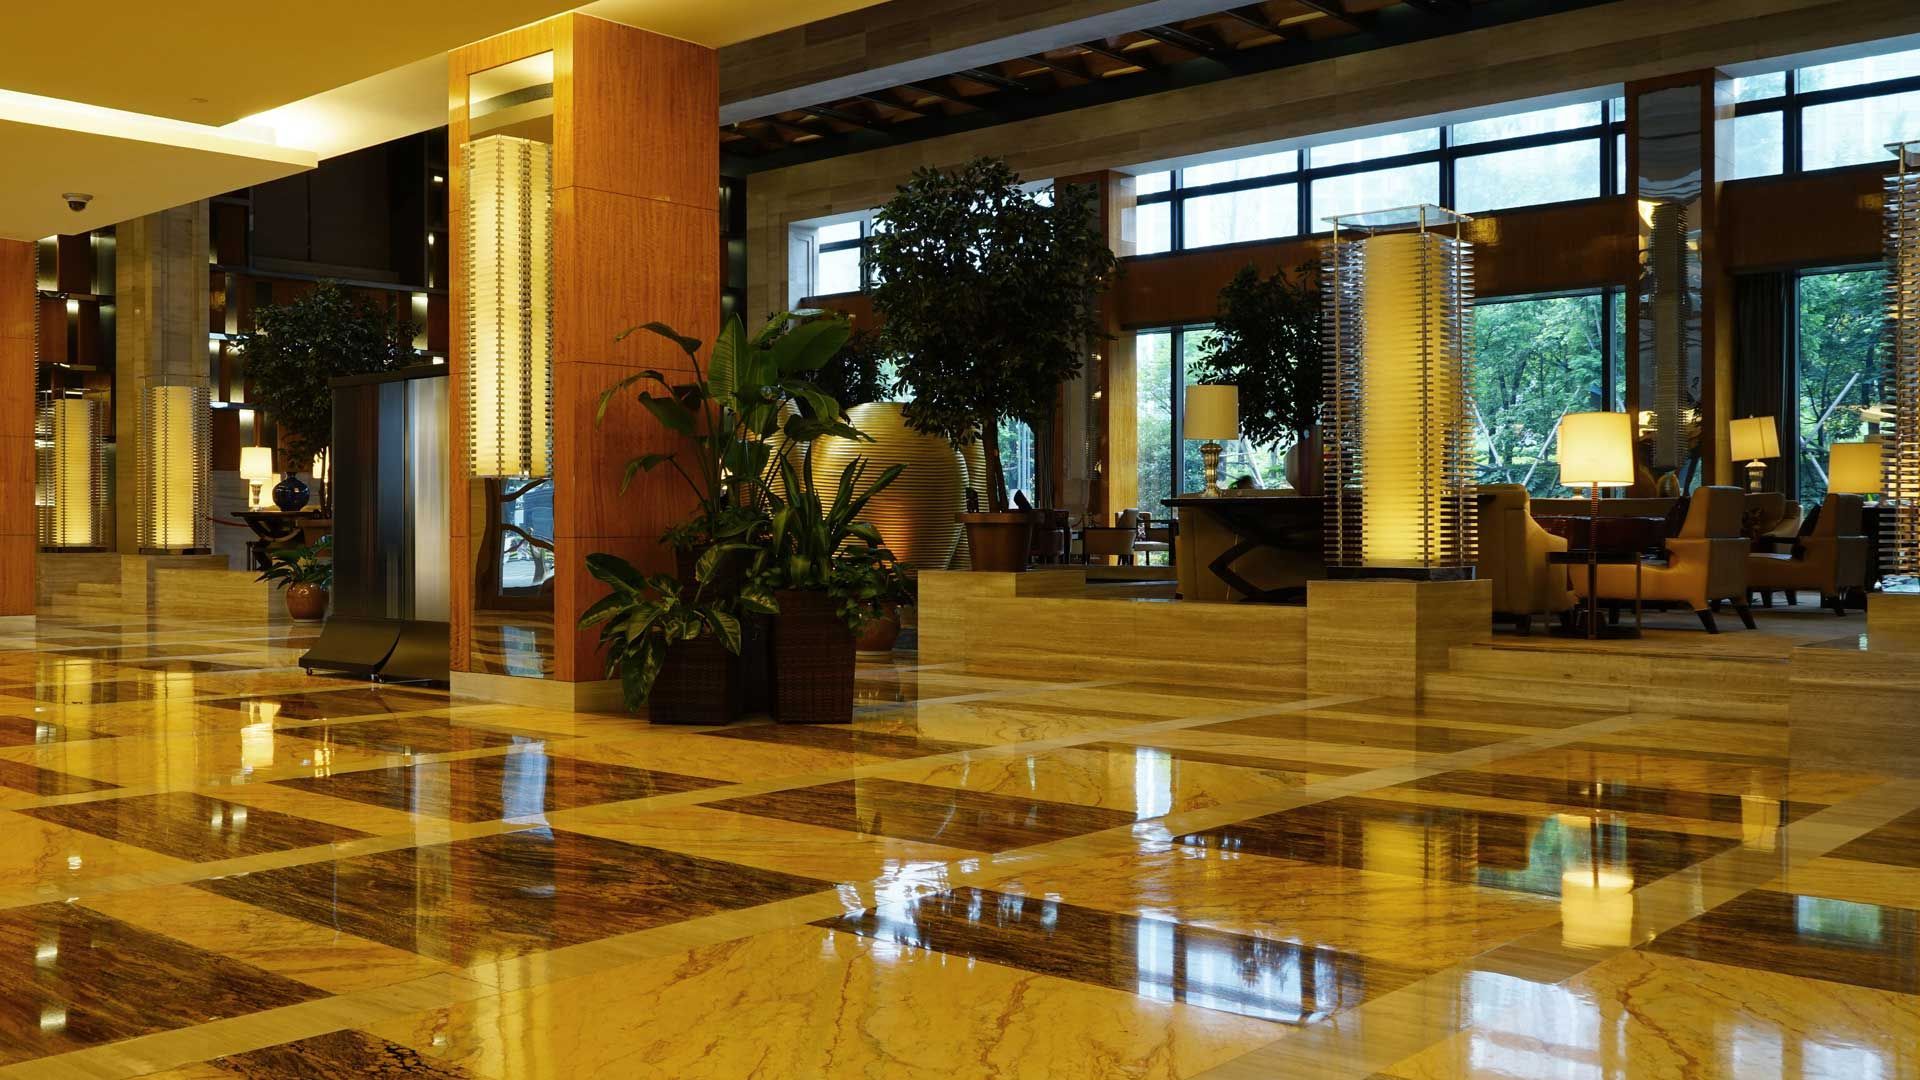 Lobby of office building